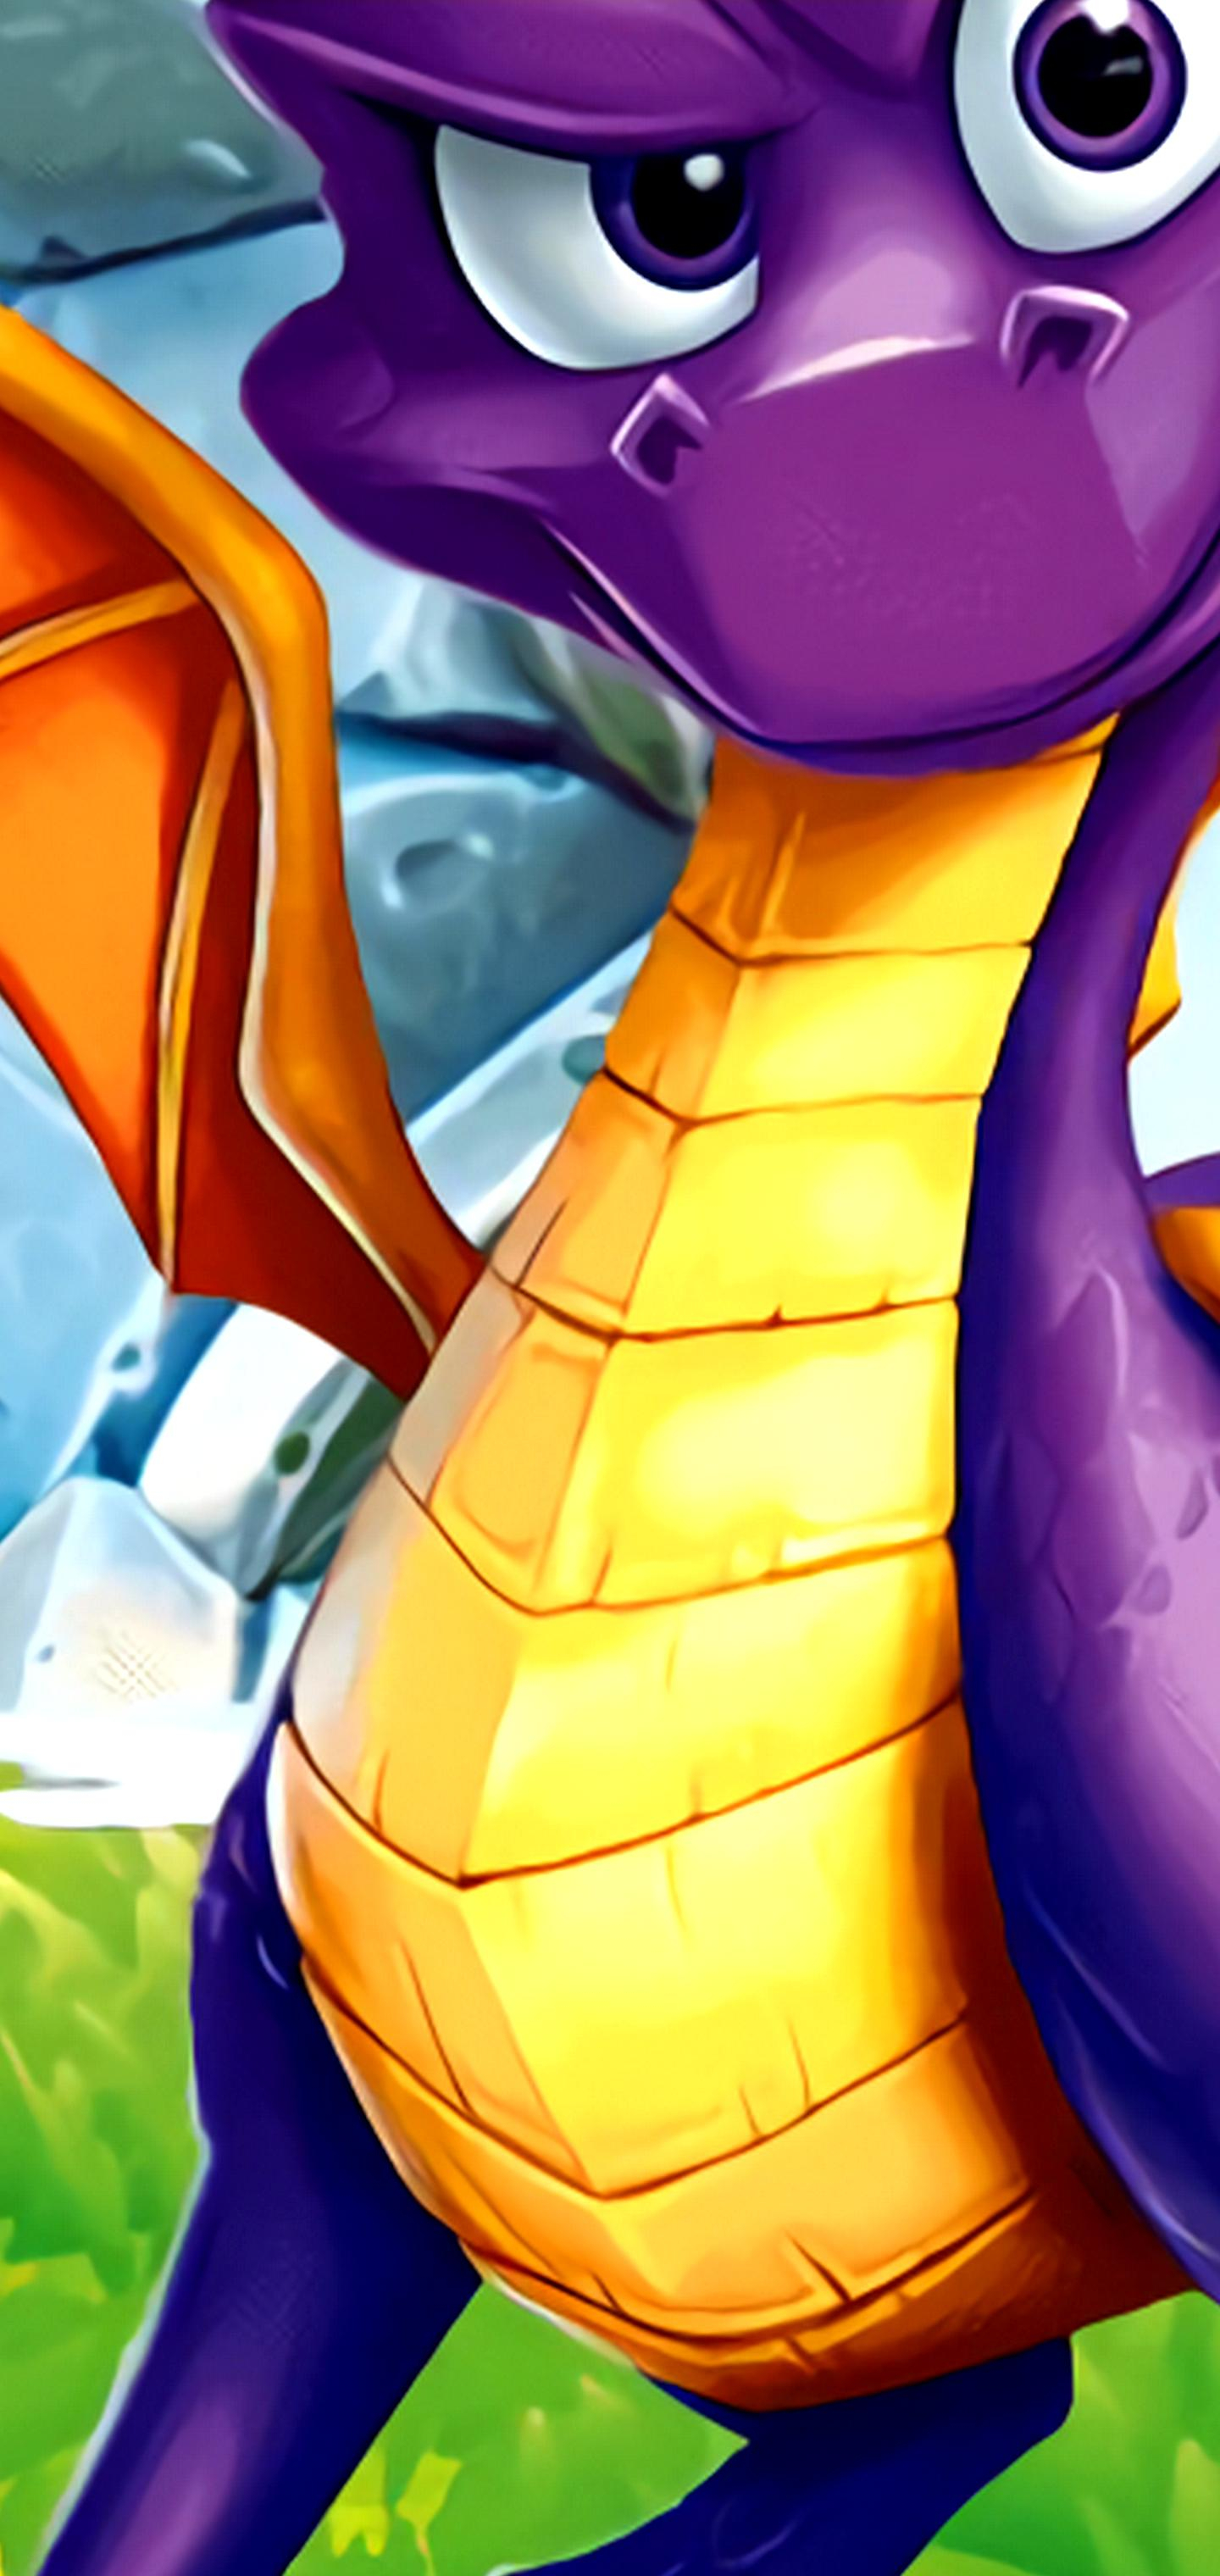 1440x3040 Spyro the Dragon by Aymms16 Galaxy S10 Hole-Punch Wallpaper